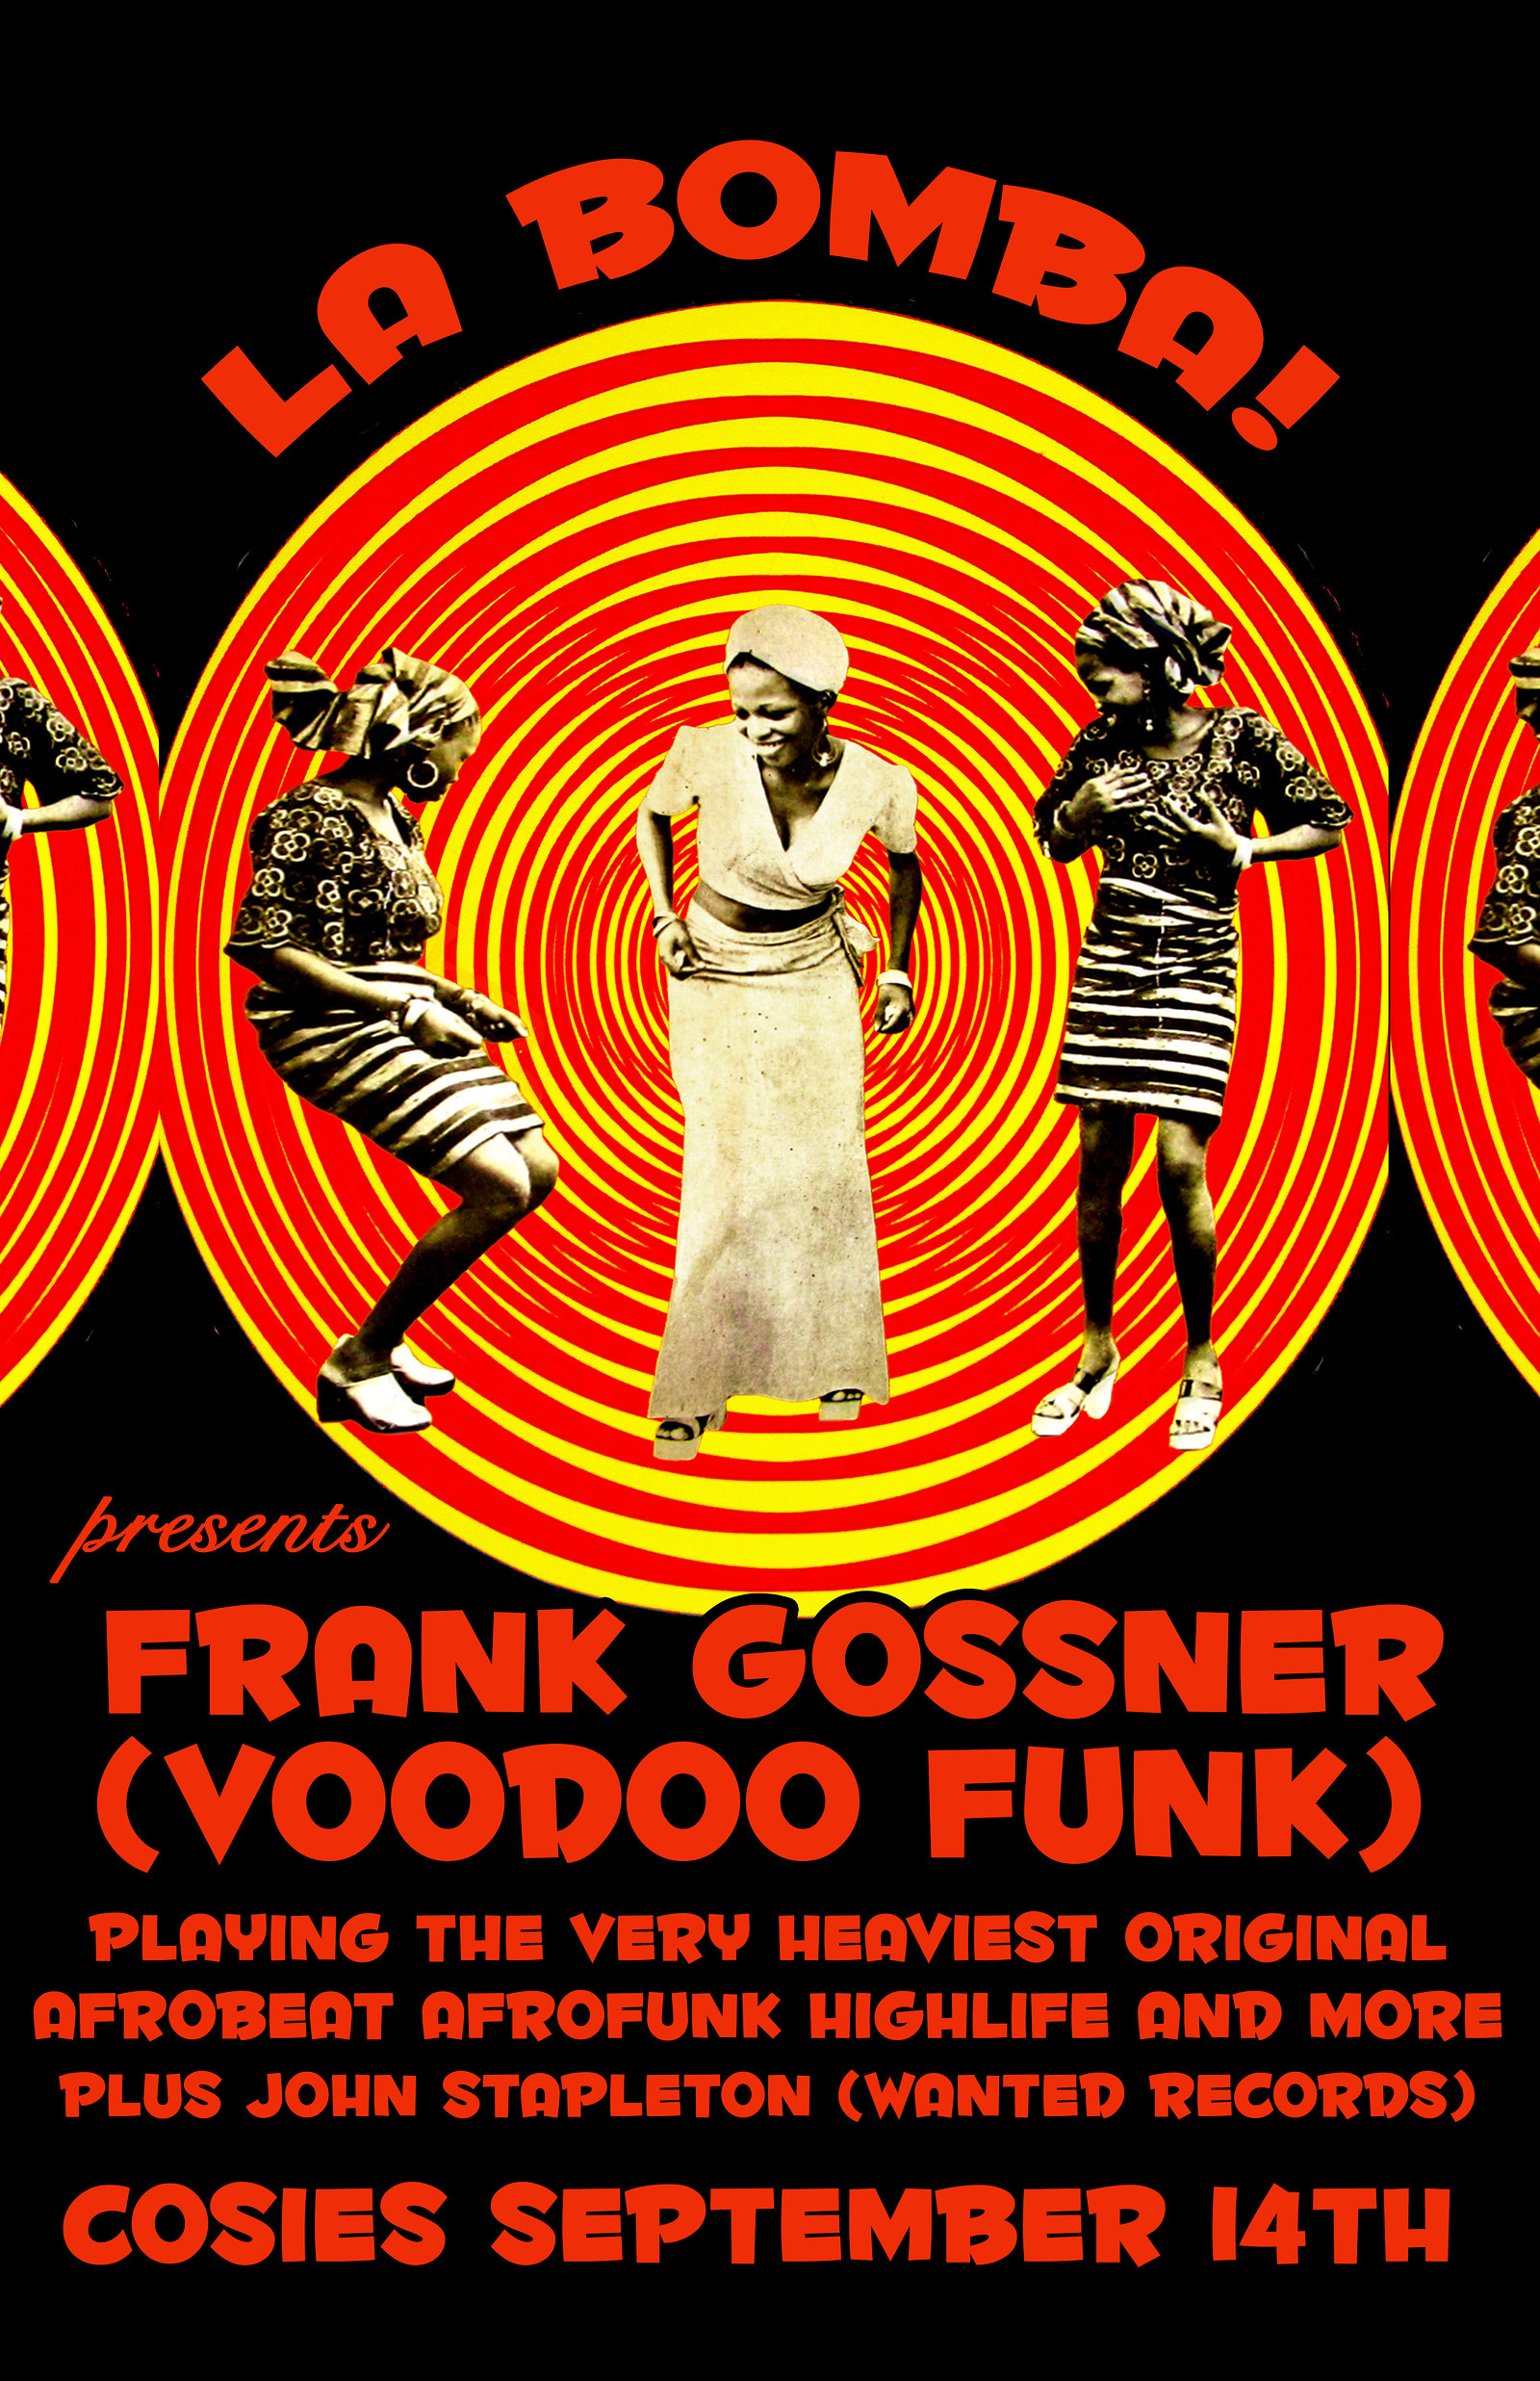 Voodoo Funk with Frank Gossner at Cosies